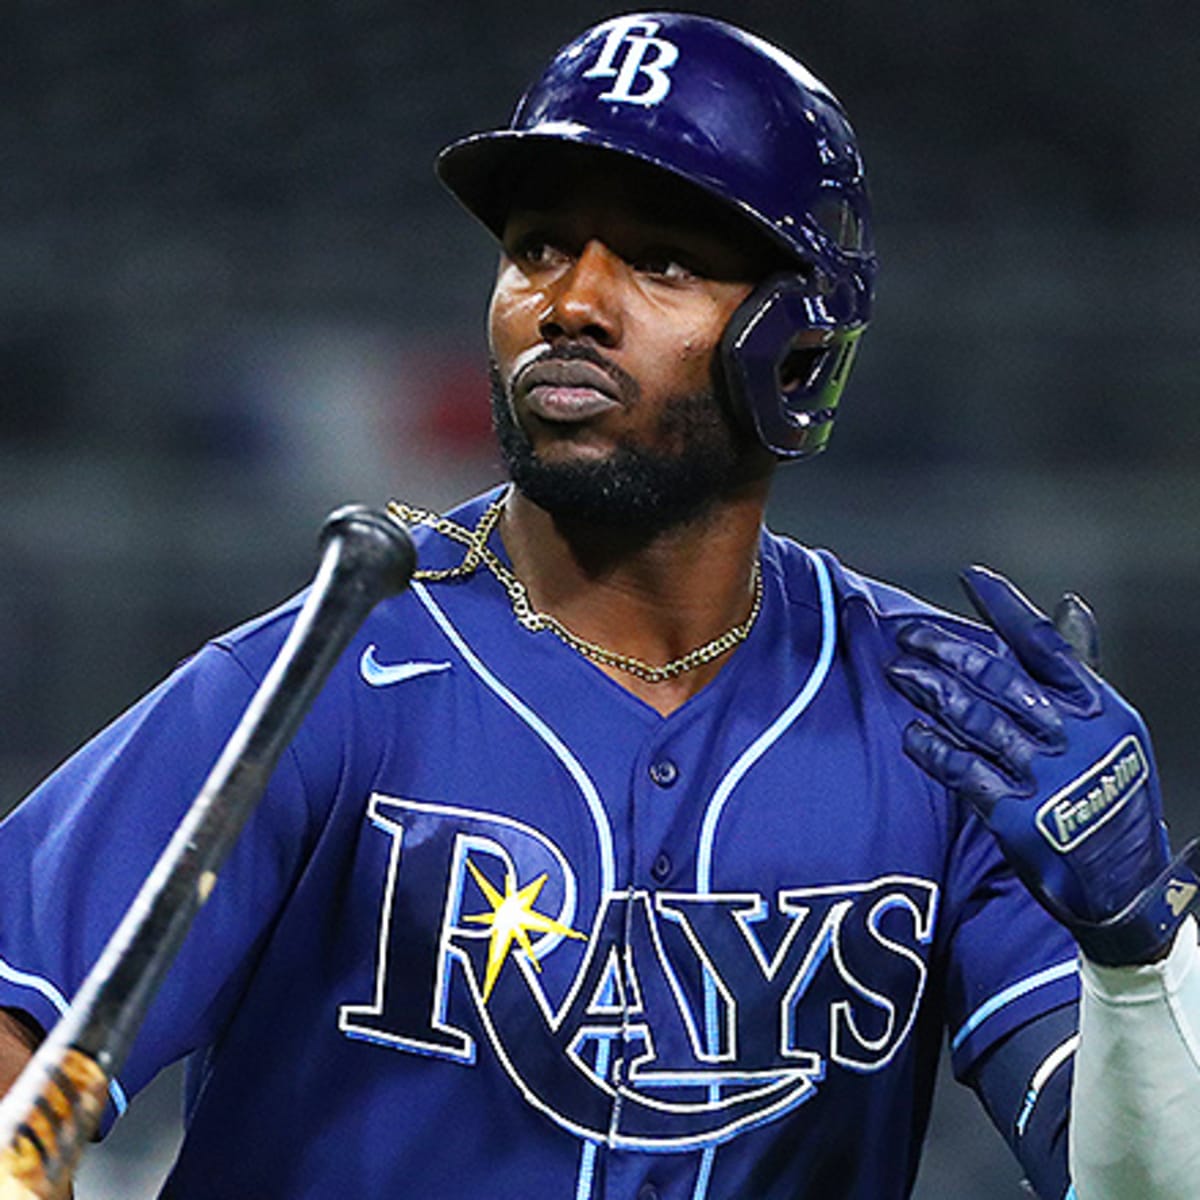 Tampa Bay Rays 2021: Scouting, Projected Lineup, Season Prediction